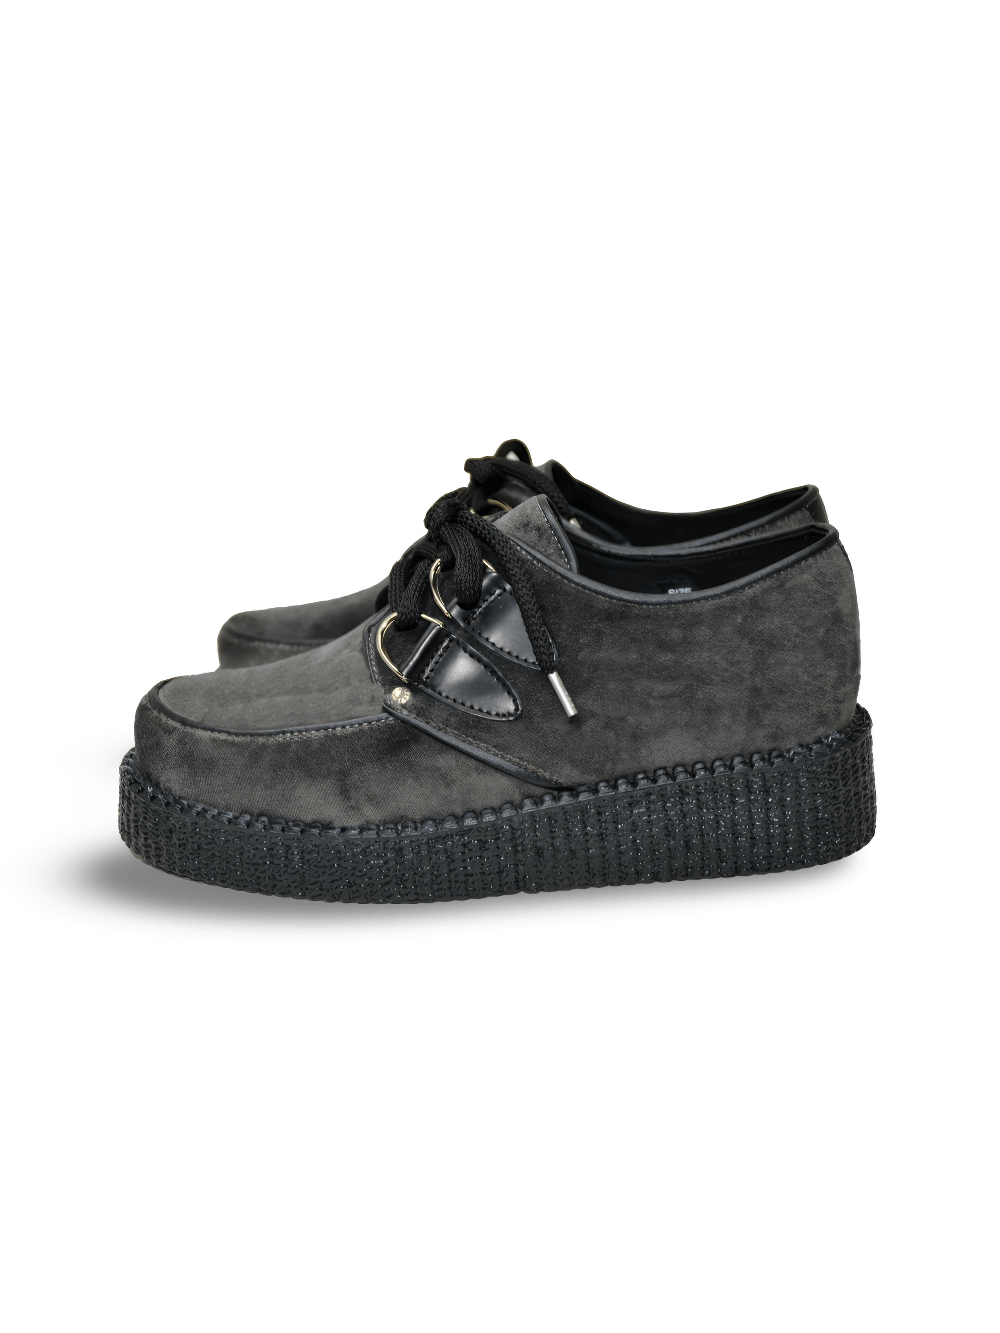 Unisex Velvet Lace-Up Classic Creepers in a Few Colors